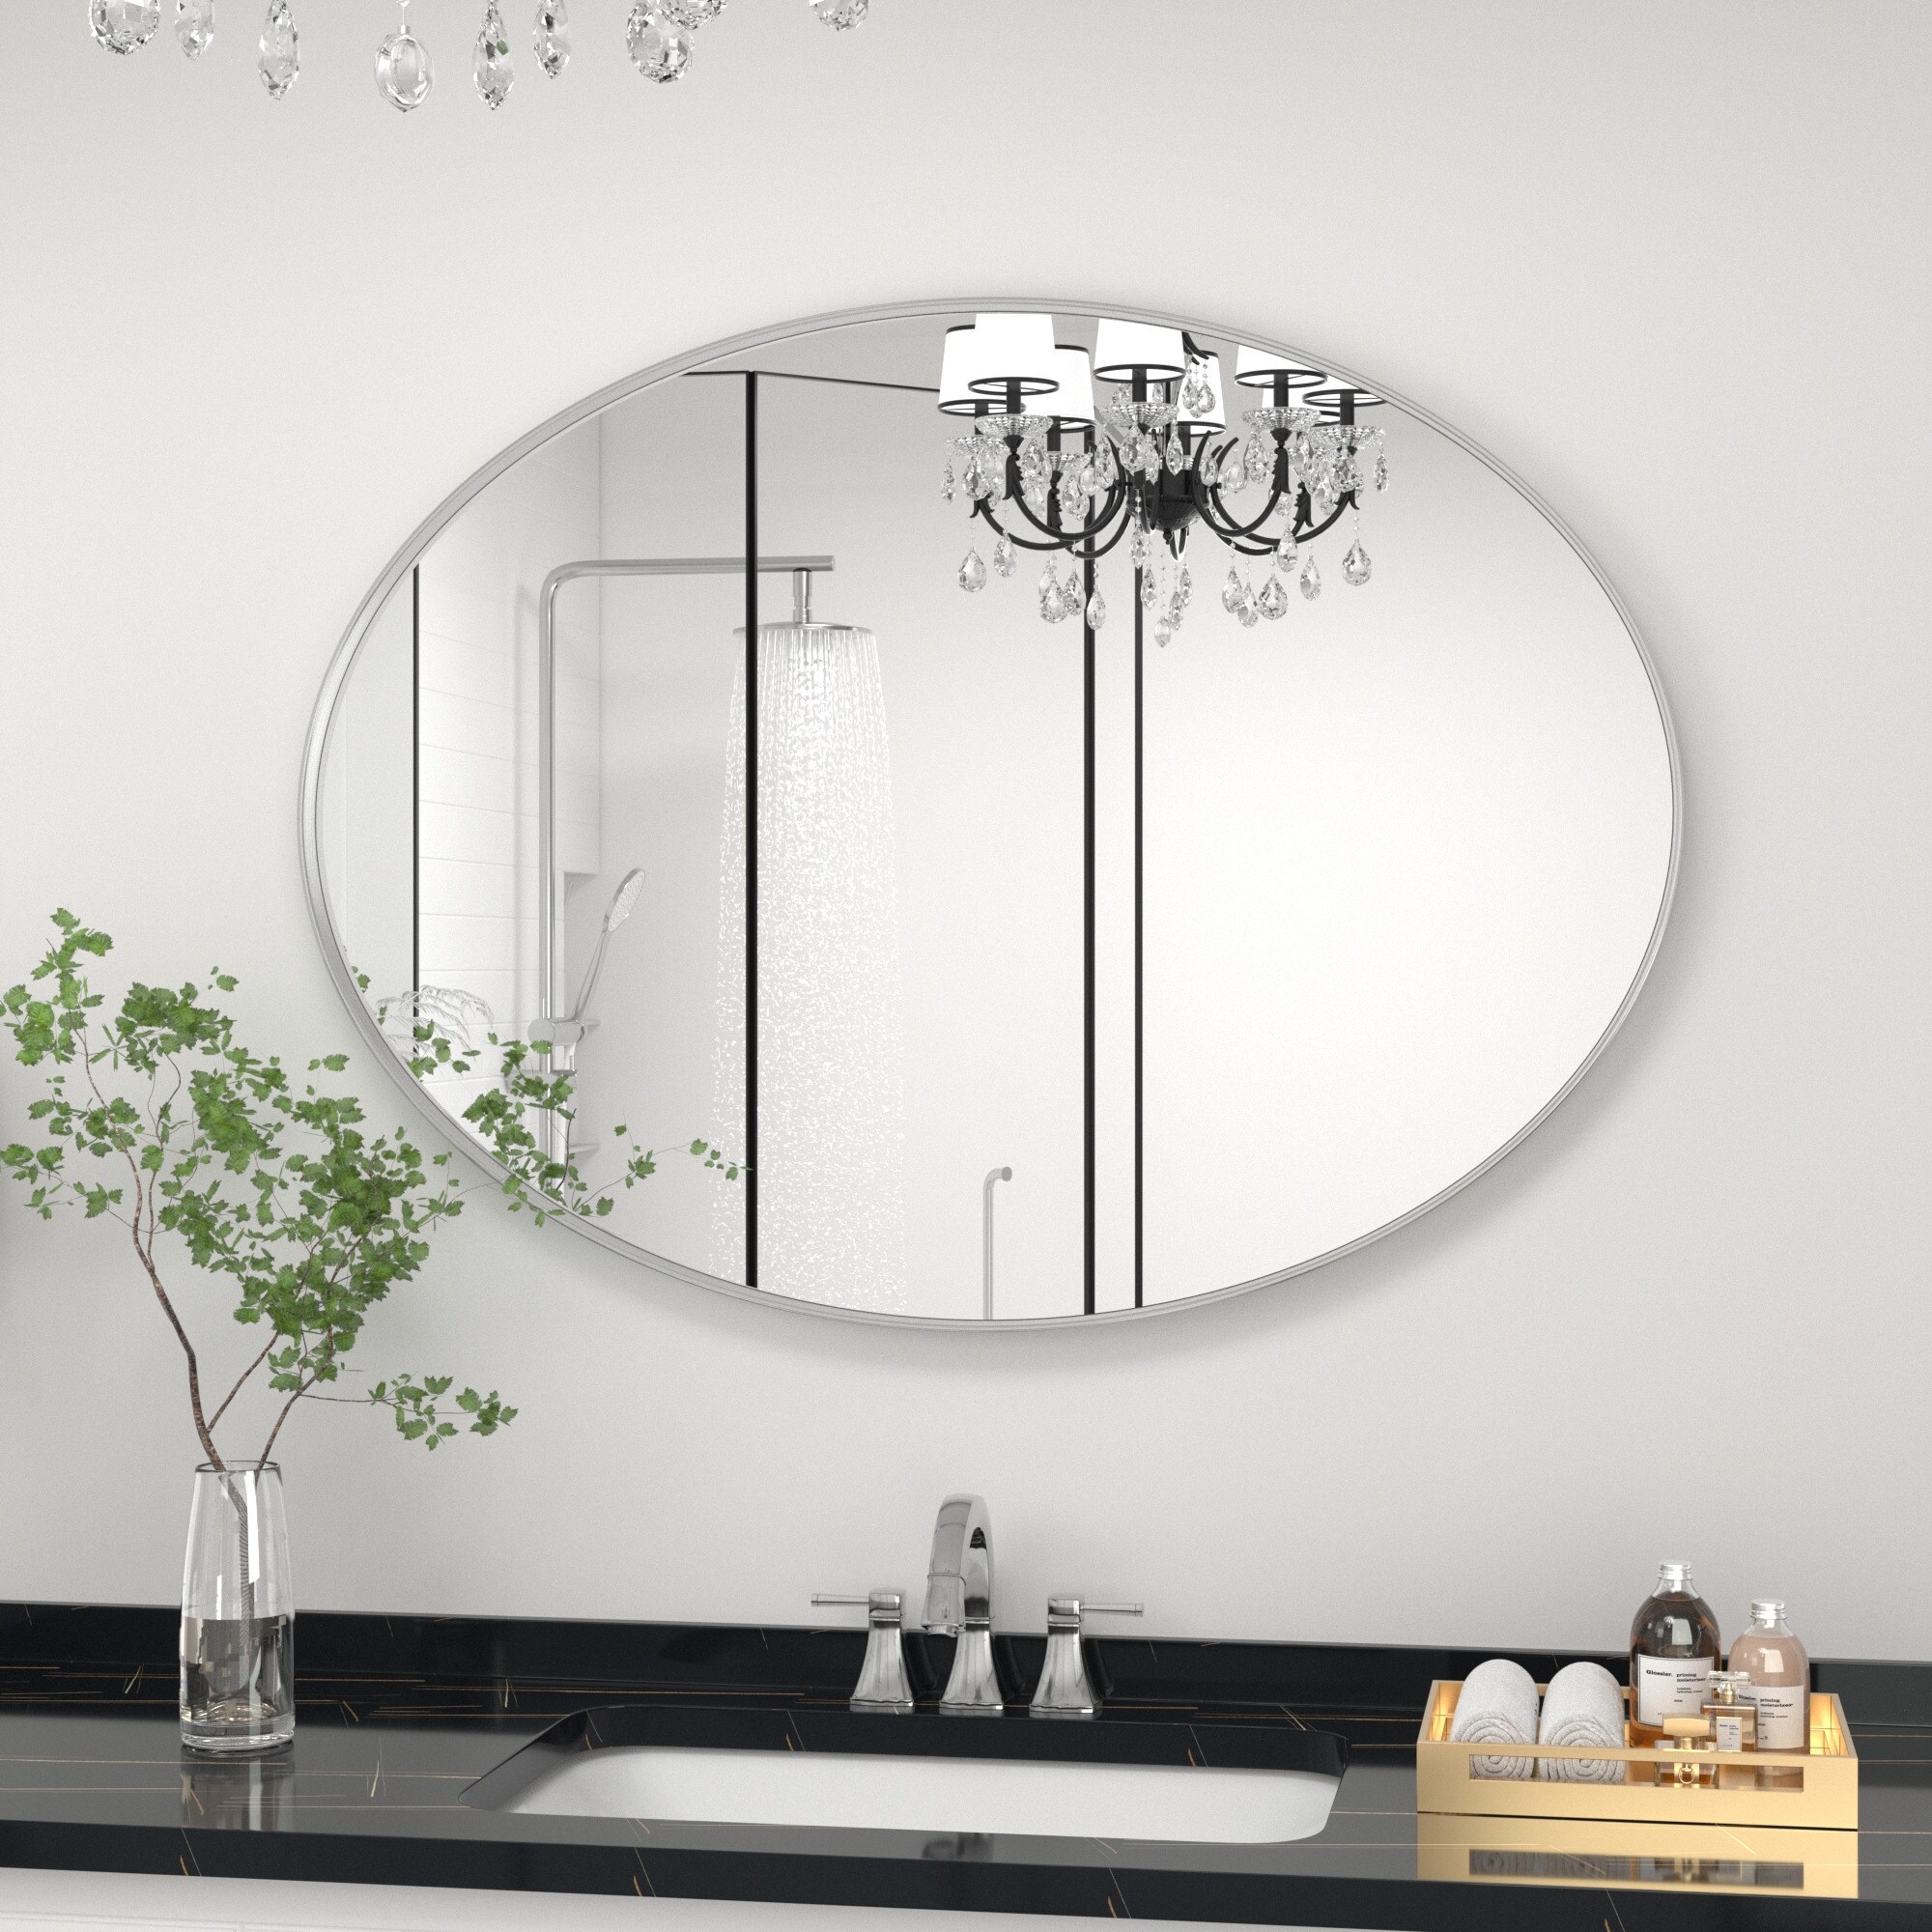 https://ak1.ostkcdn.com/images/products/is/images/direct/3be557f71512dbd547dcfcd4bc6c50b483fe8fd6/Modern-Wall-Mirror%2C-Oval-Mirror-with-Metal-Framed%2C-Bathroom-Mirror-with-Round-Corner-Vanity-Mirror-for-Vertical-Horizontal.jpg